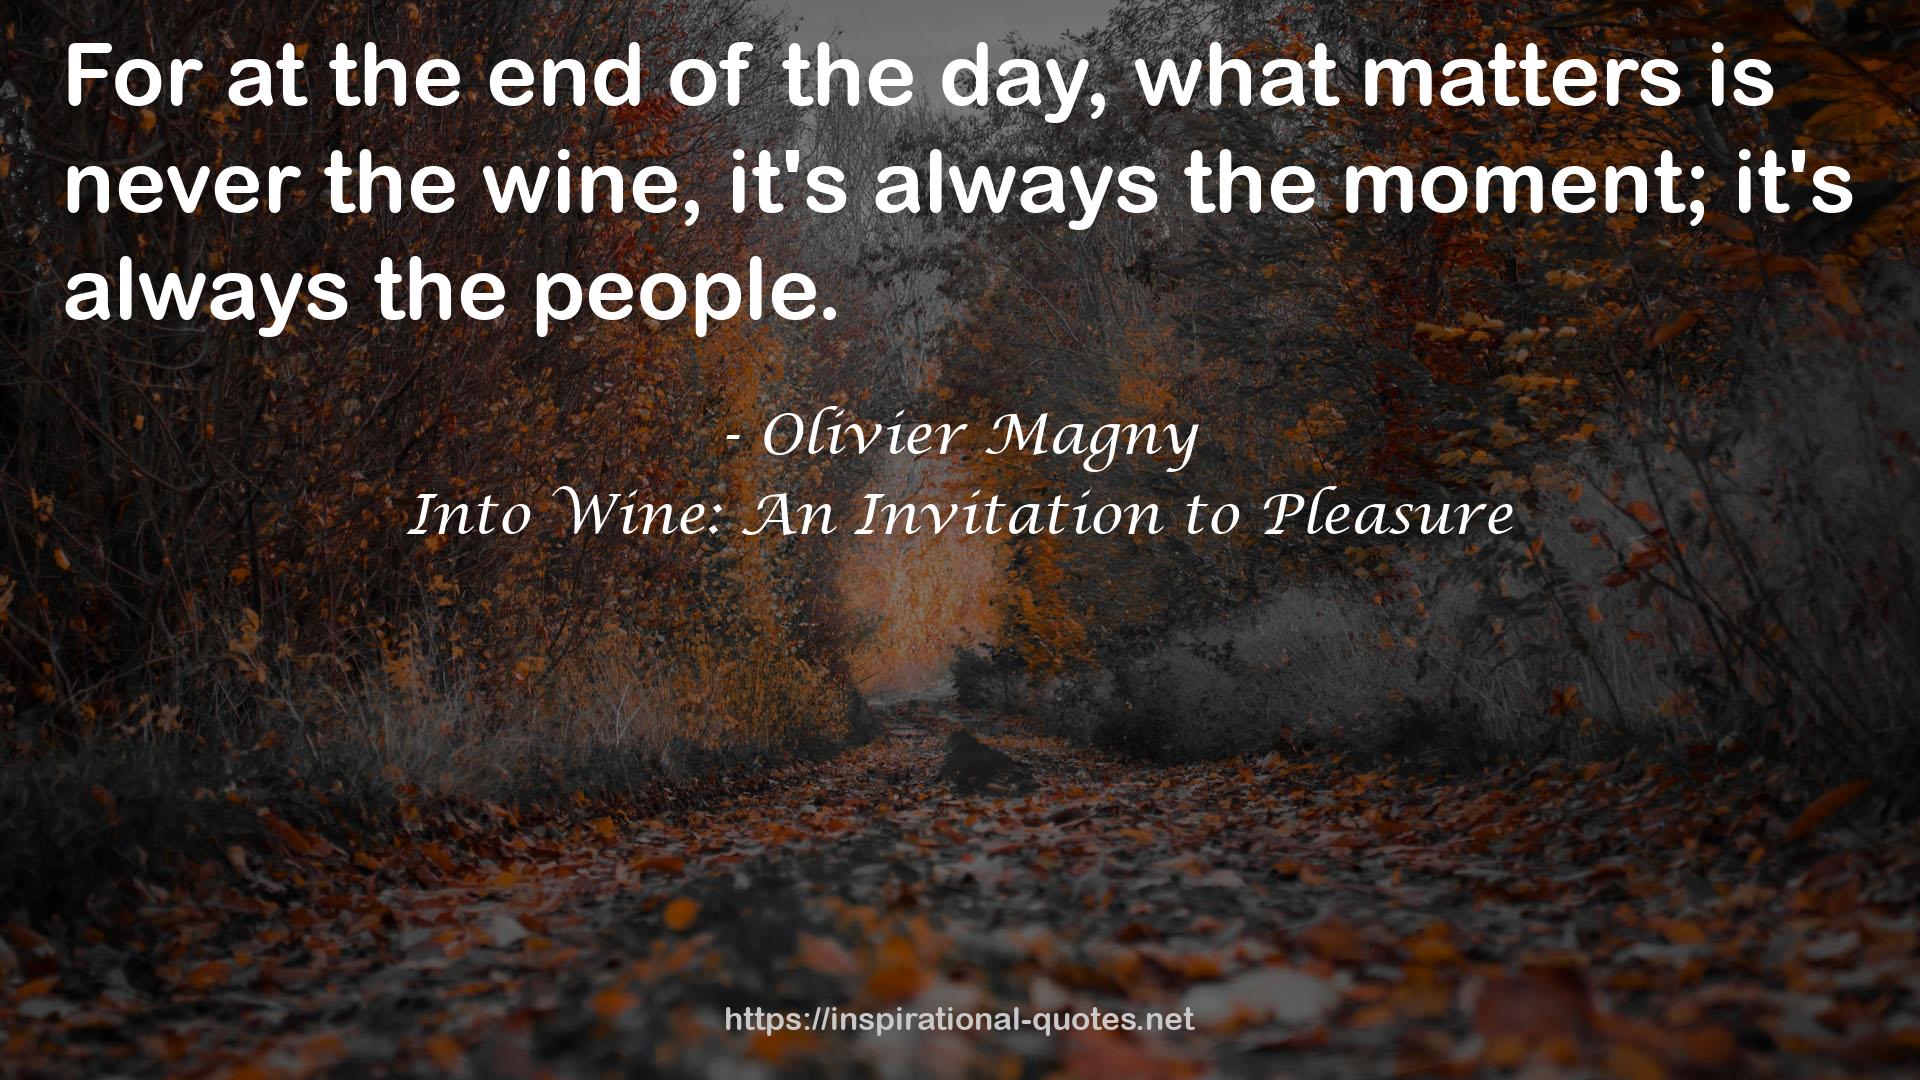 Olivier Magny QUOTES